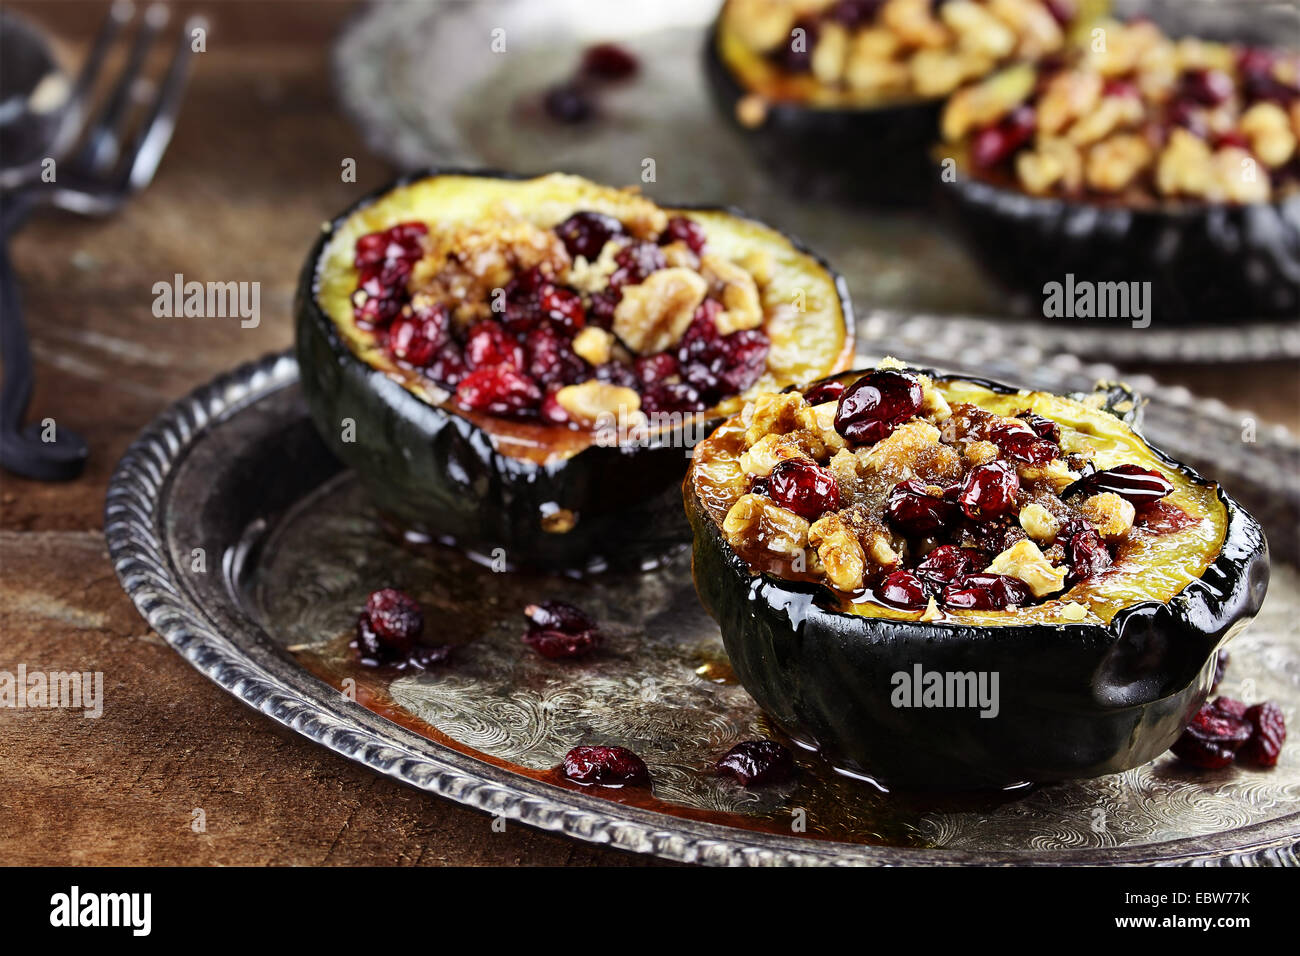 Acorn squash stuffed and baked with butter, brown sugar, walnuts and cranberries, ready for holiday dinners. Stock Photo